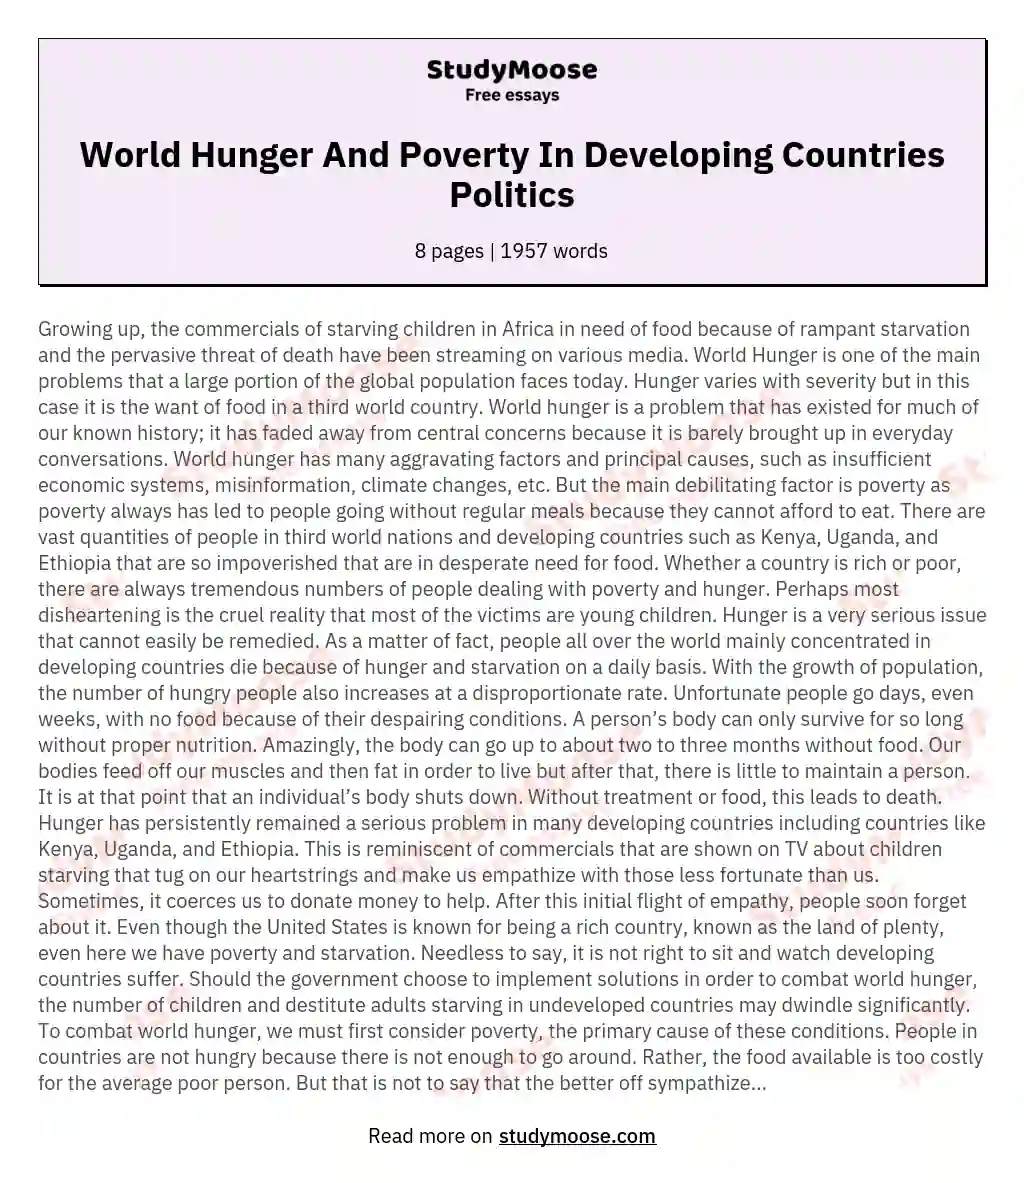 World Hunger And Poverty In Developing Countries Politics